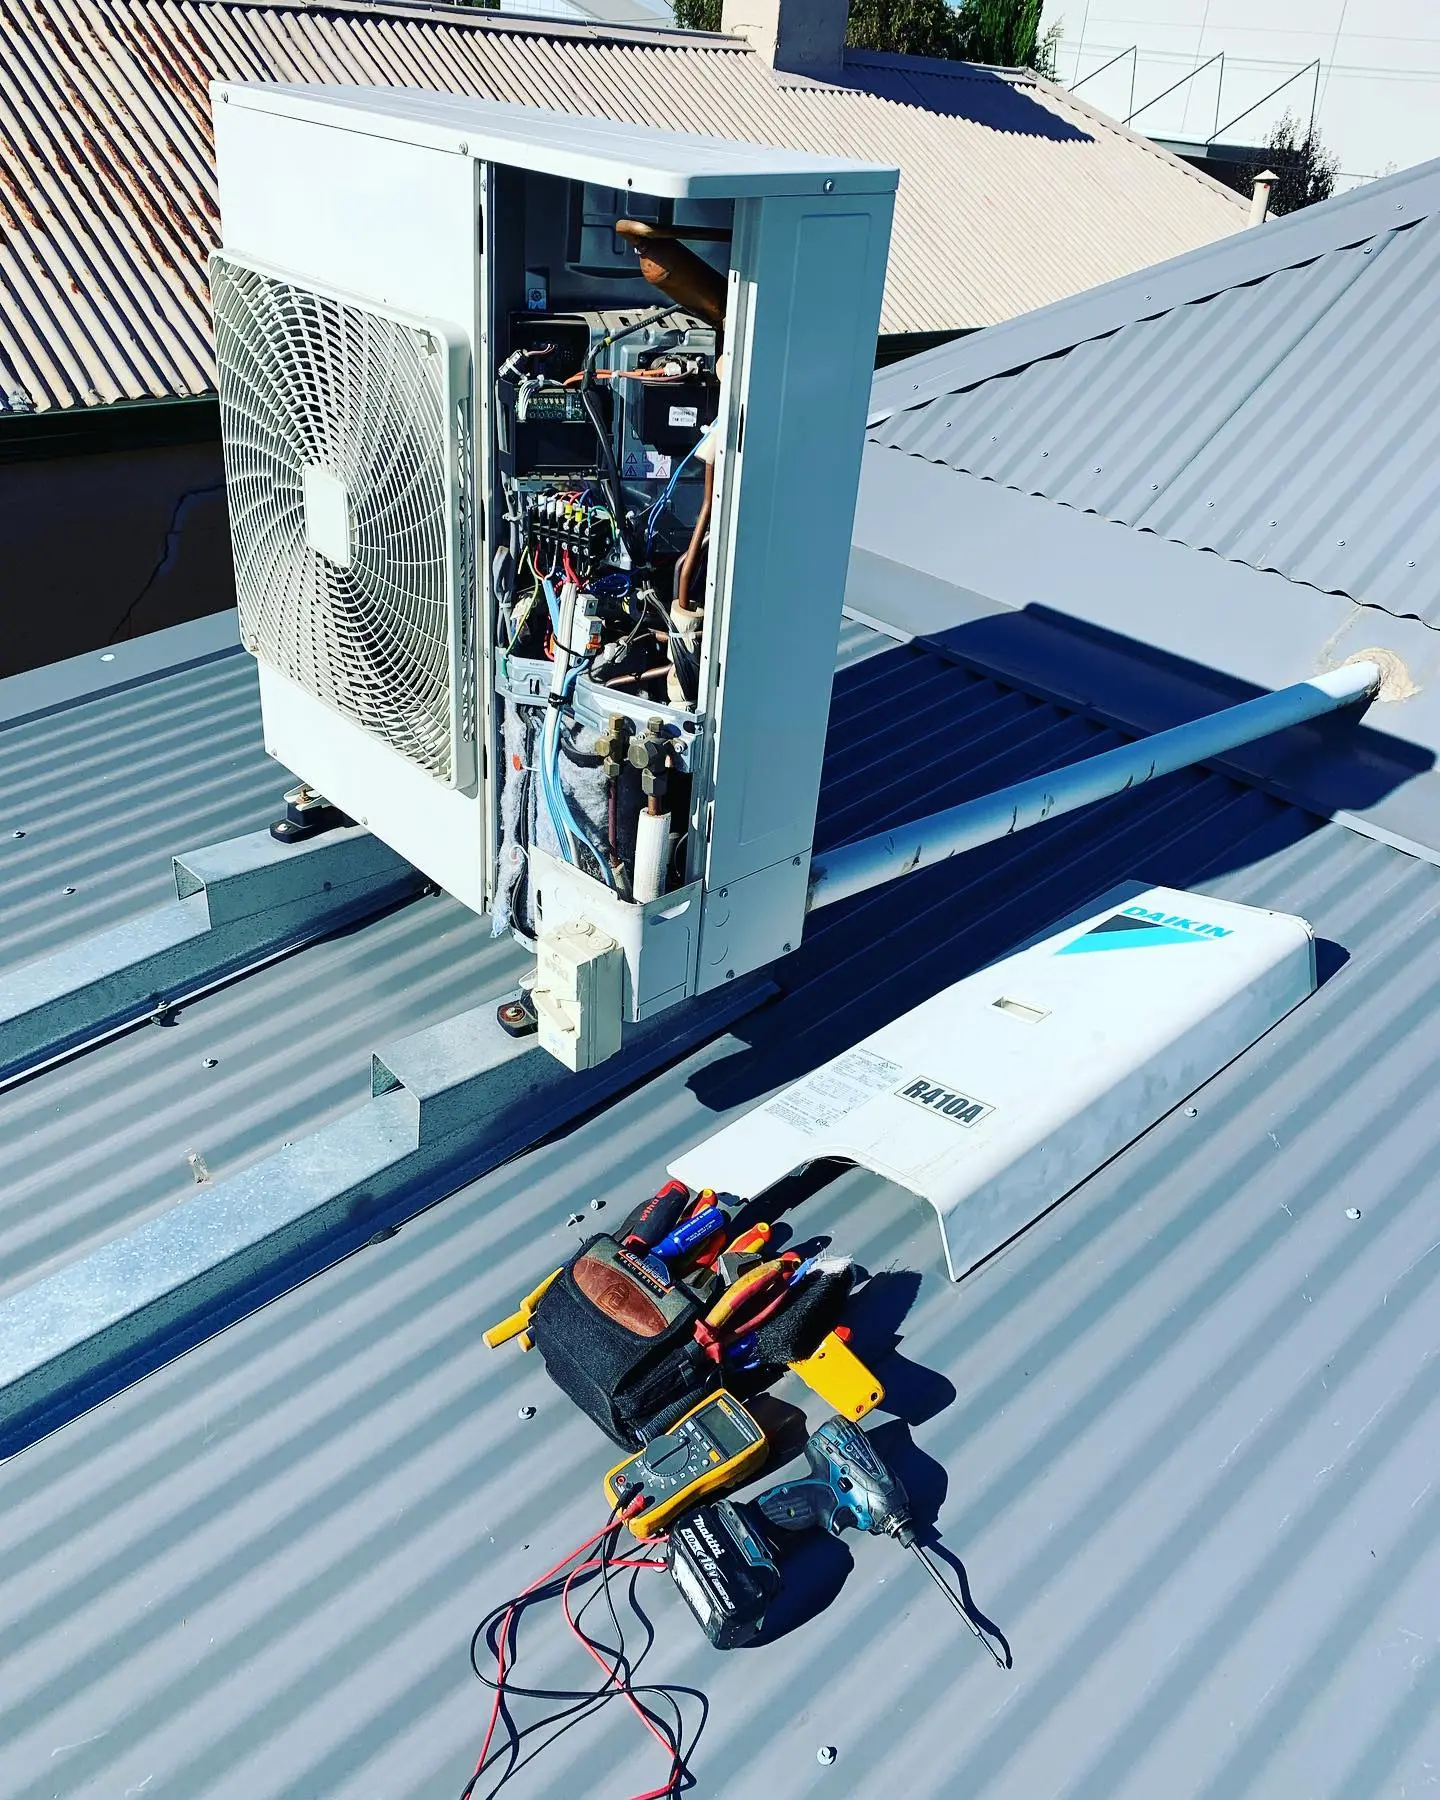 Repairing a airconditioner on a roof in Adelaide.